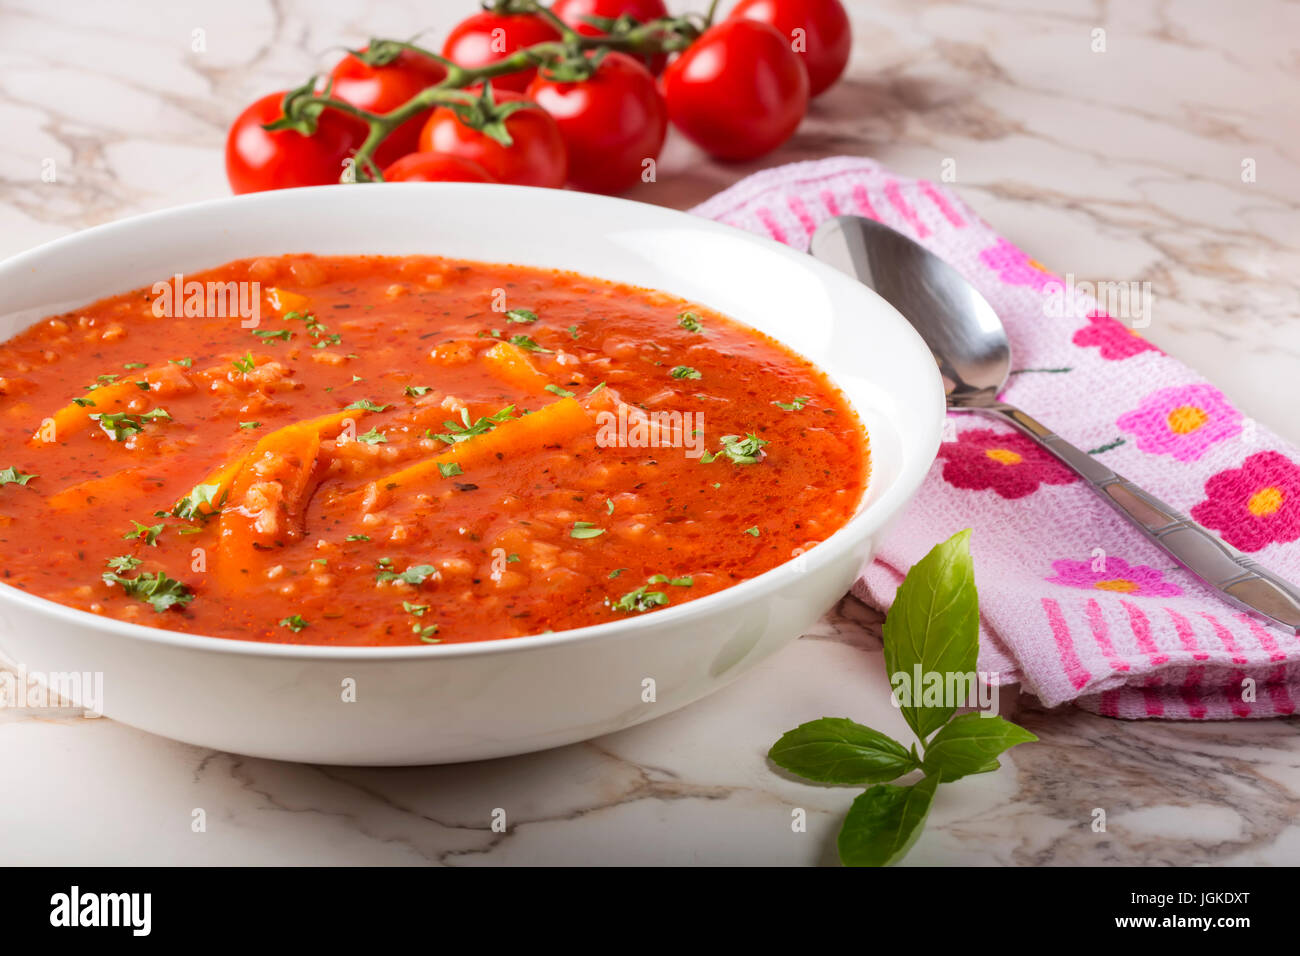 Summer soup made from tomato sauce, rice and carrot in white plate with spoon on towel Stock Photo